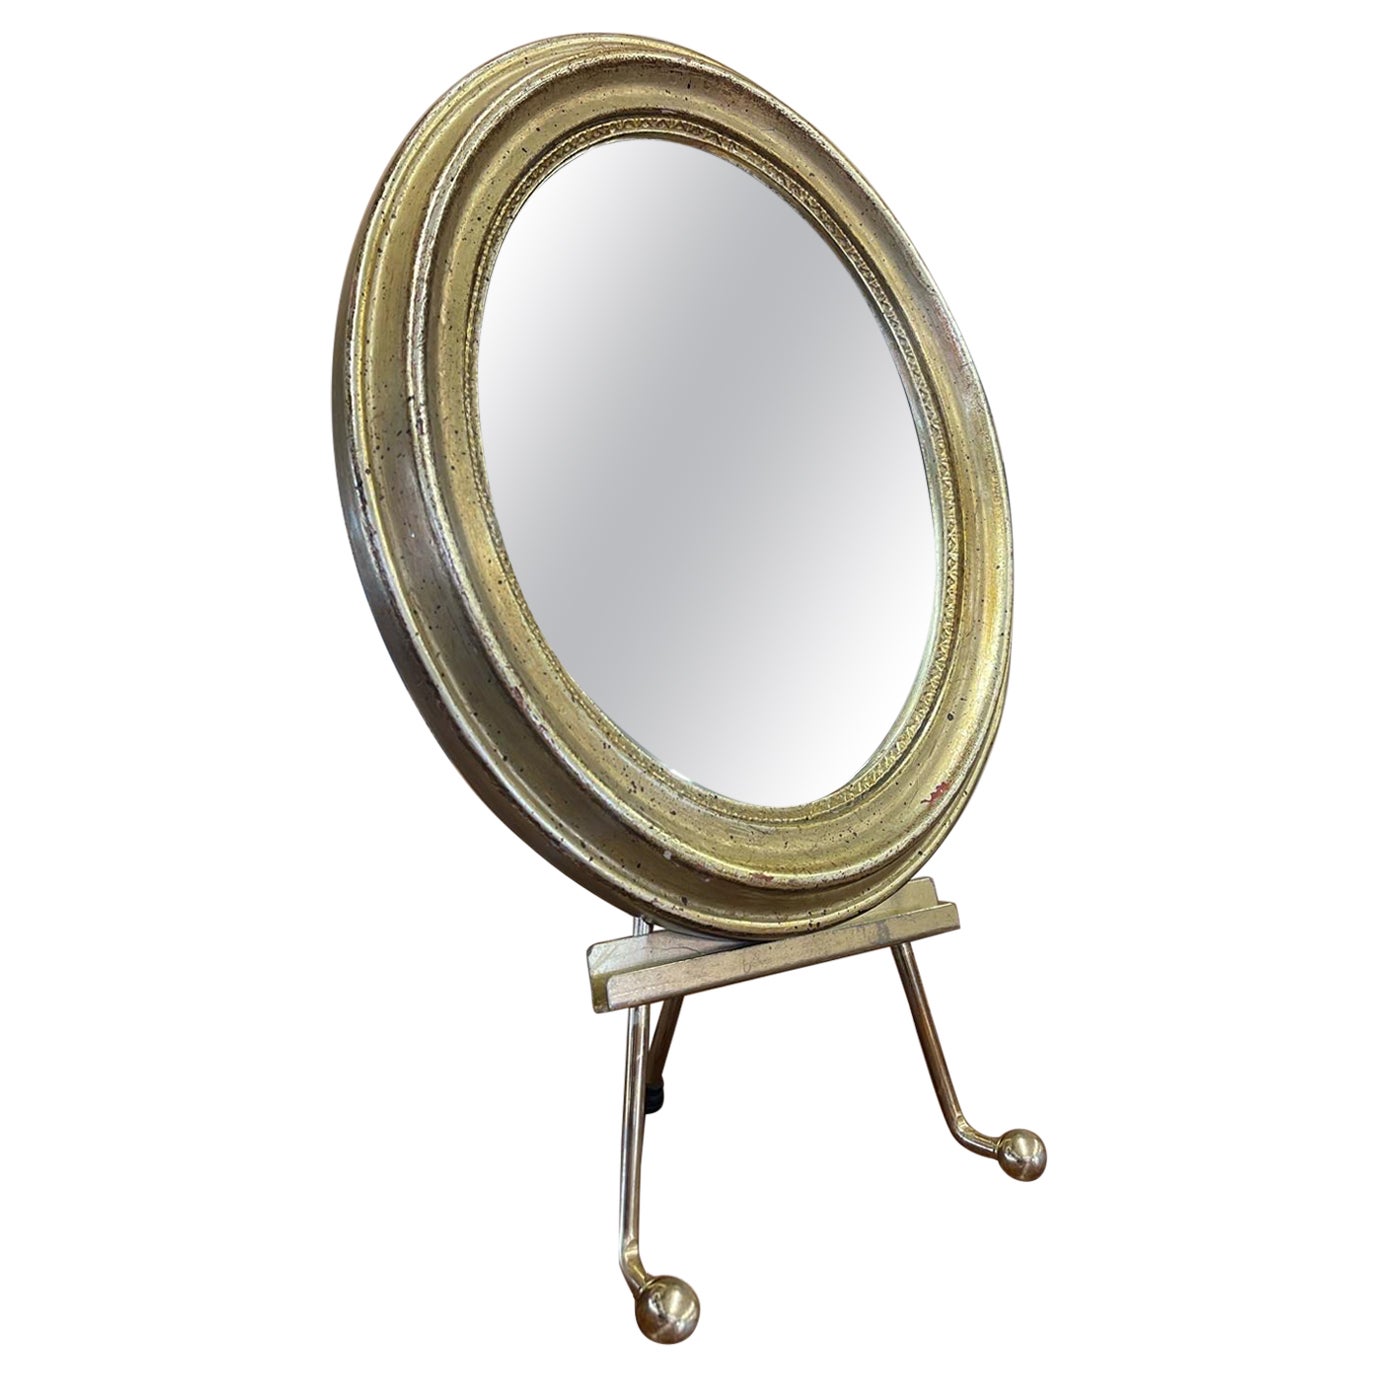 Vintage Oval Shaped Wall Mirror.